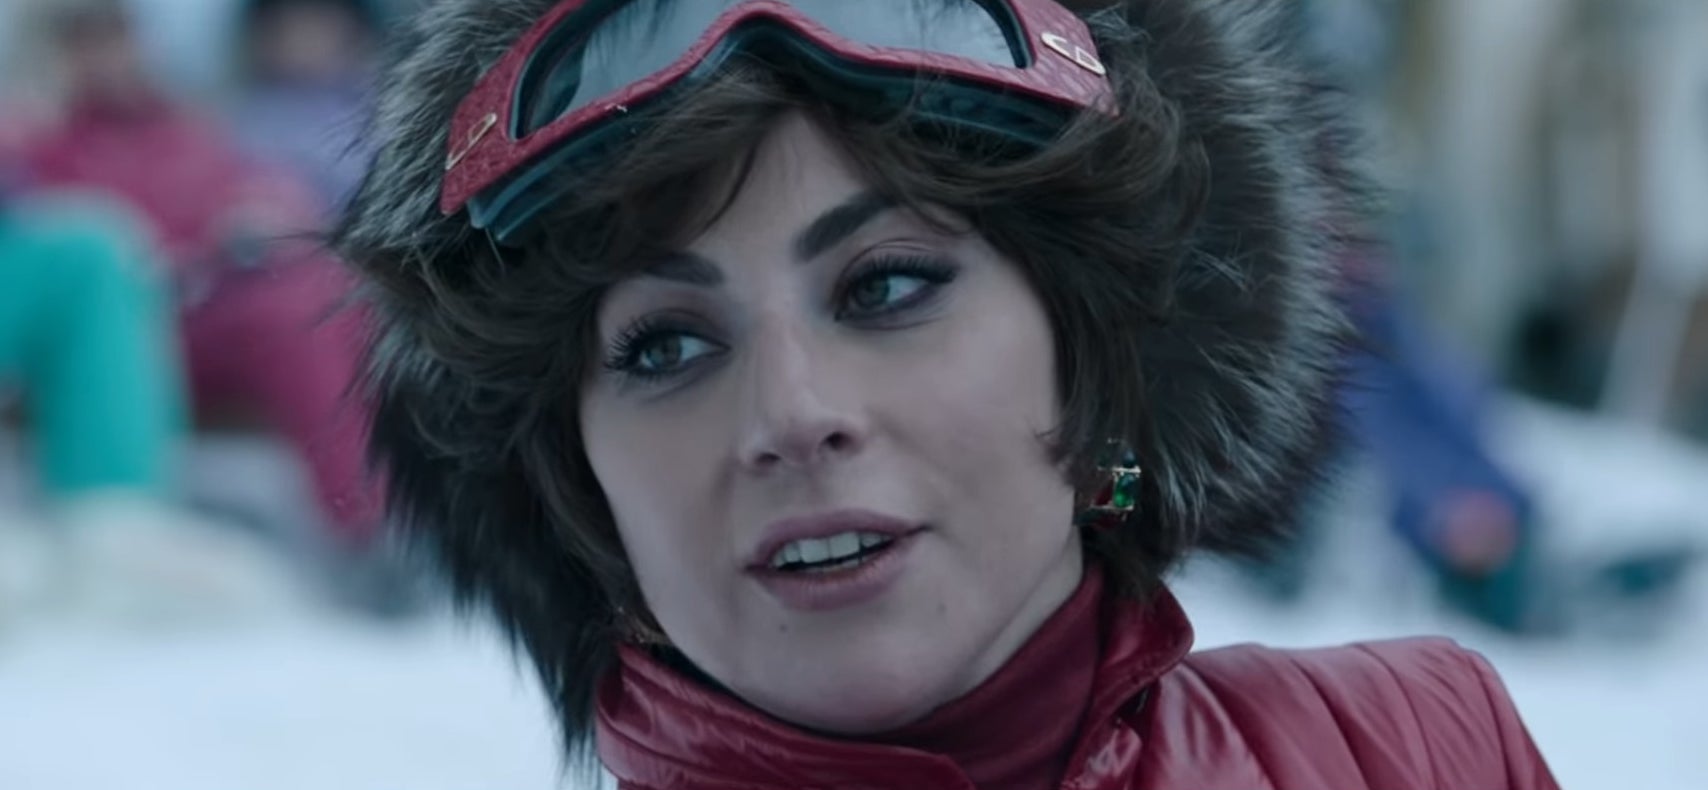 Patrizia wearing a skiing outfit in &quot;House of Gucci&quot;